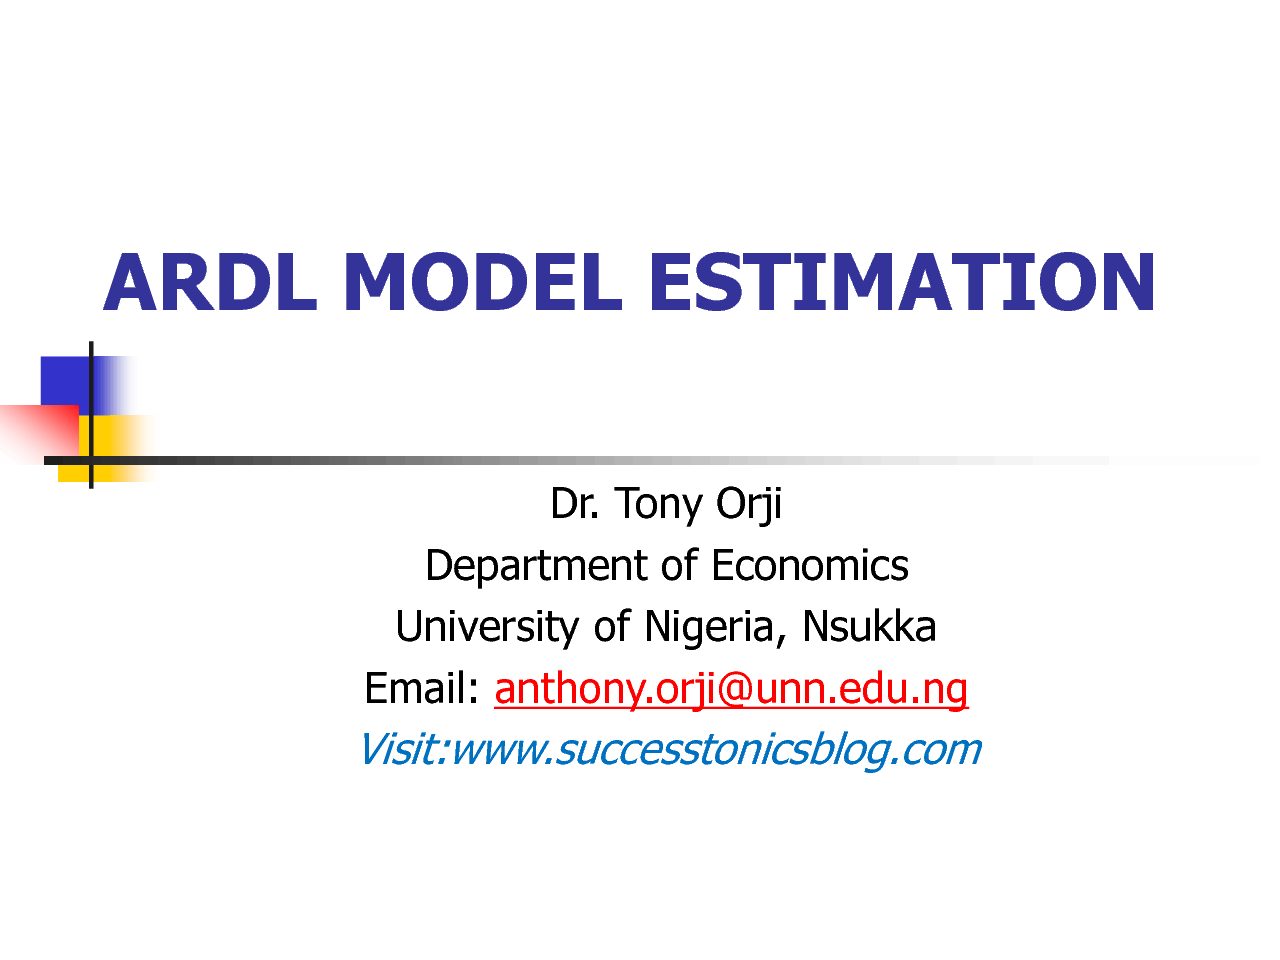 ARDL Mode and Estimation